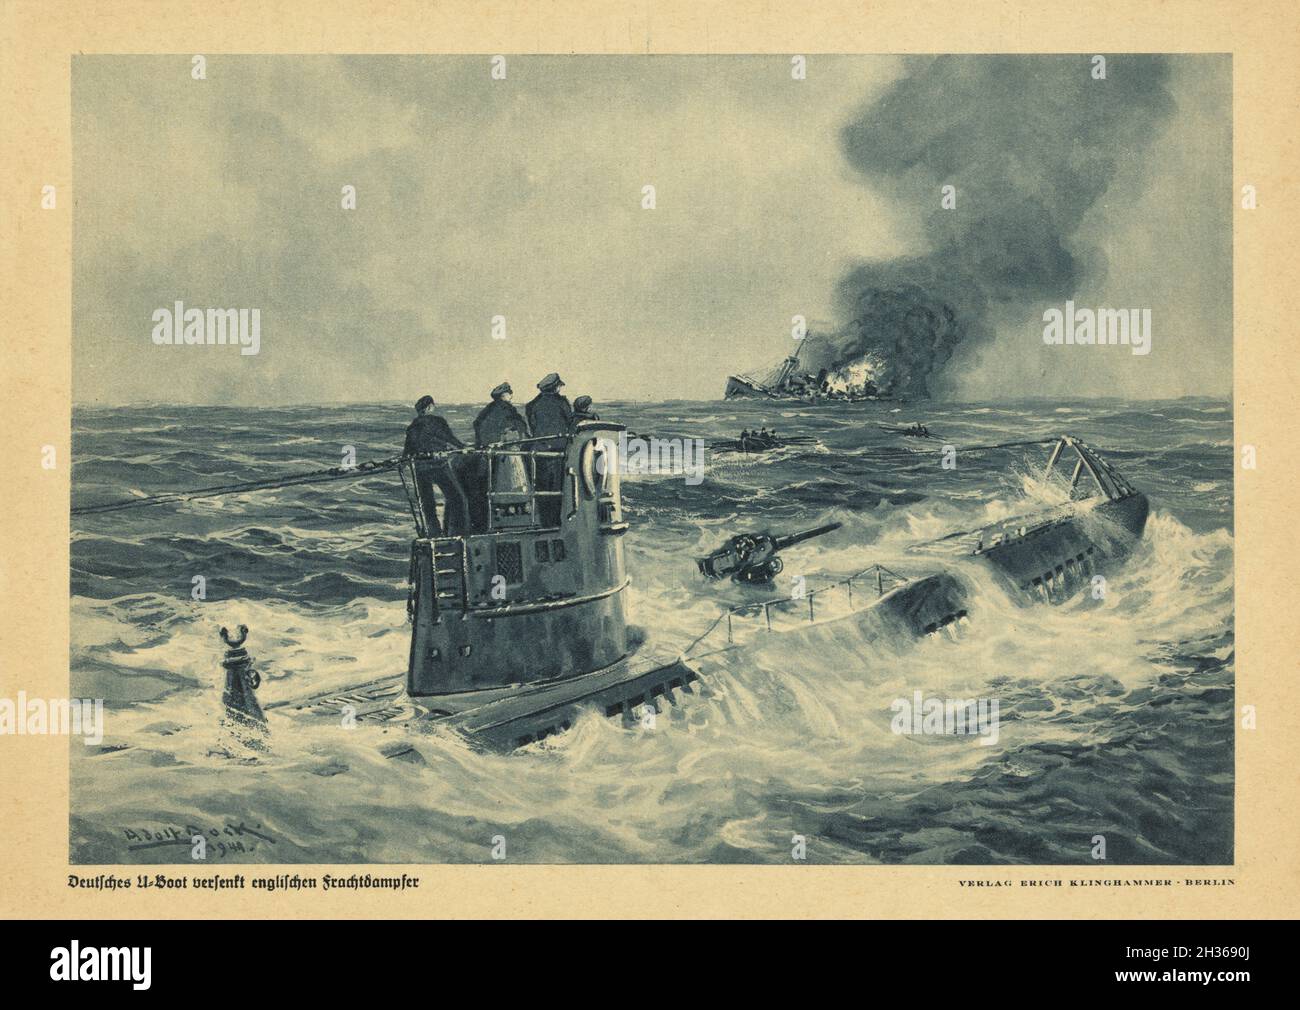 A vintage illustration circa 1941 of a British cargo ship sinking after being torpedoed by a German submarine or U-boat. Painted by Adolf Bock Stock Photo